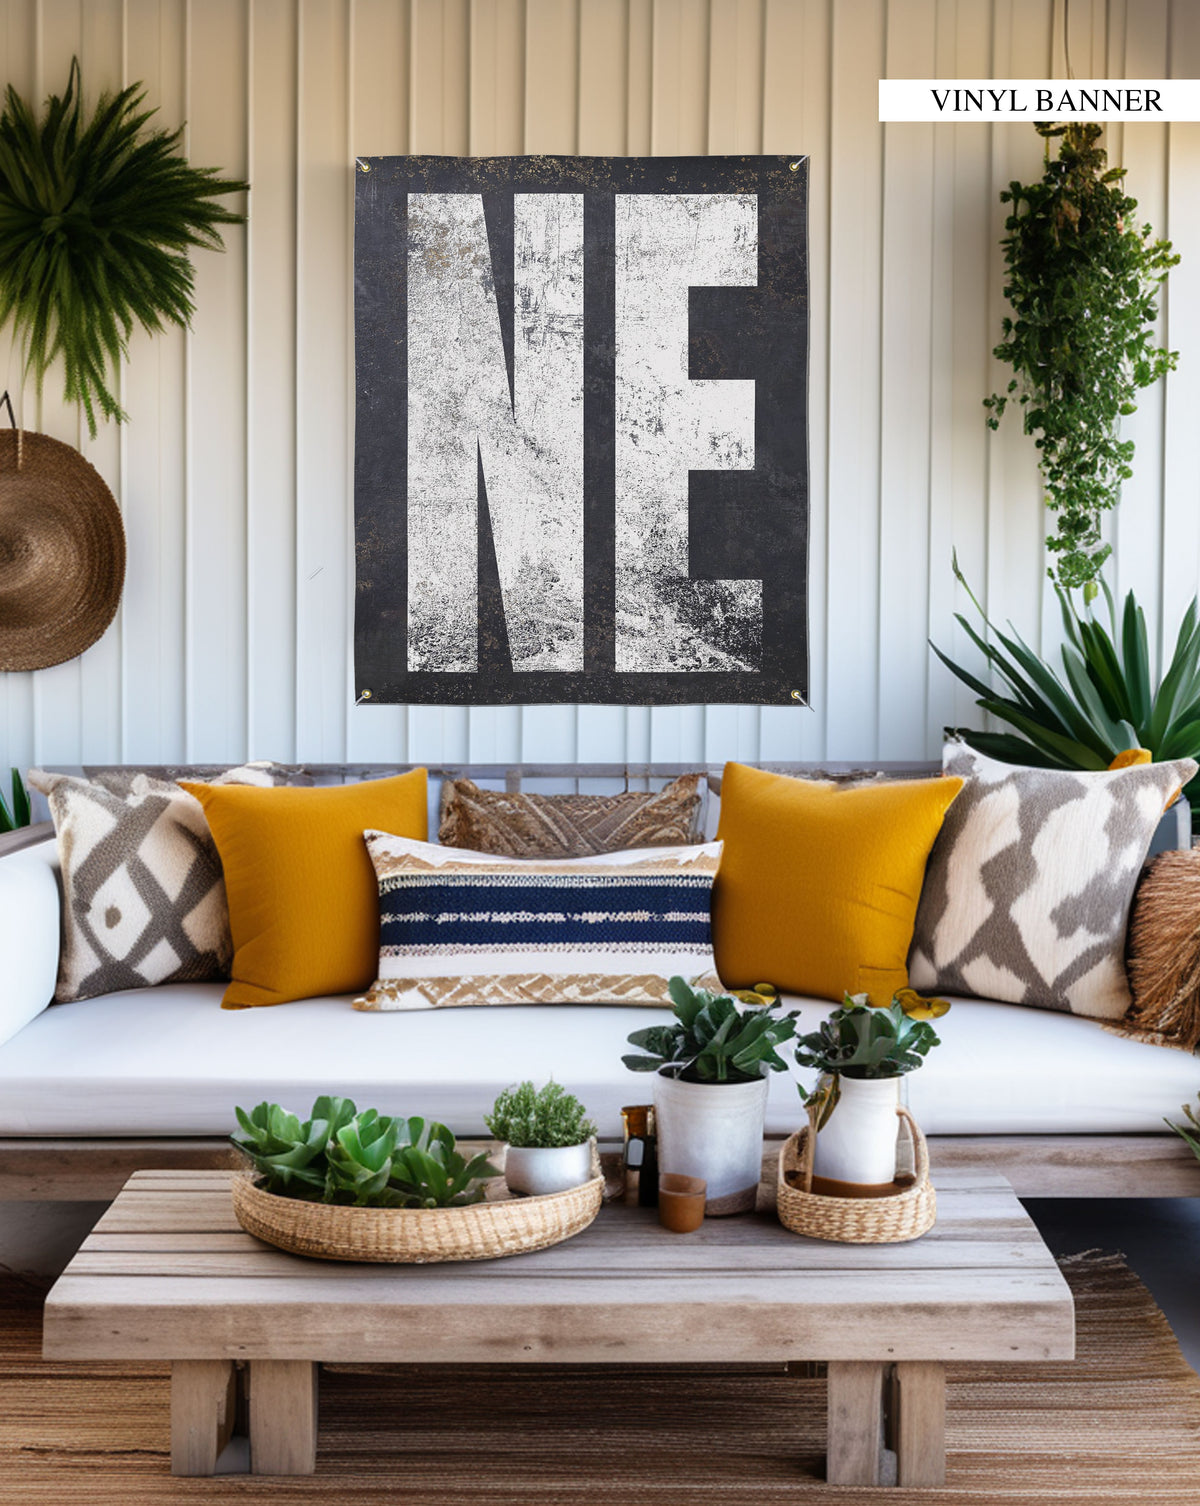 Western Decor Vinyl Banner for Nebraska Homes: Perfect for Backyard Bars, with a Touch of Farmhouse Charm.